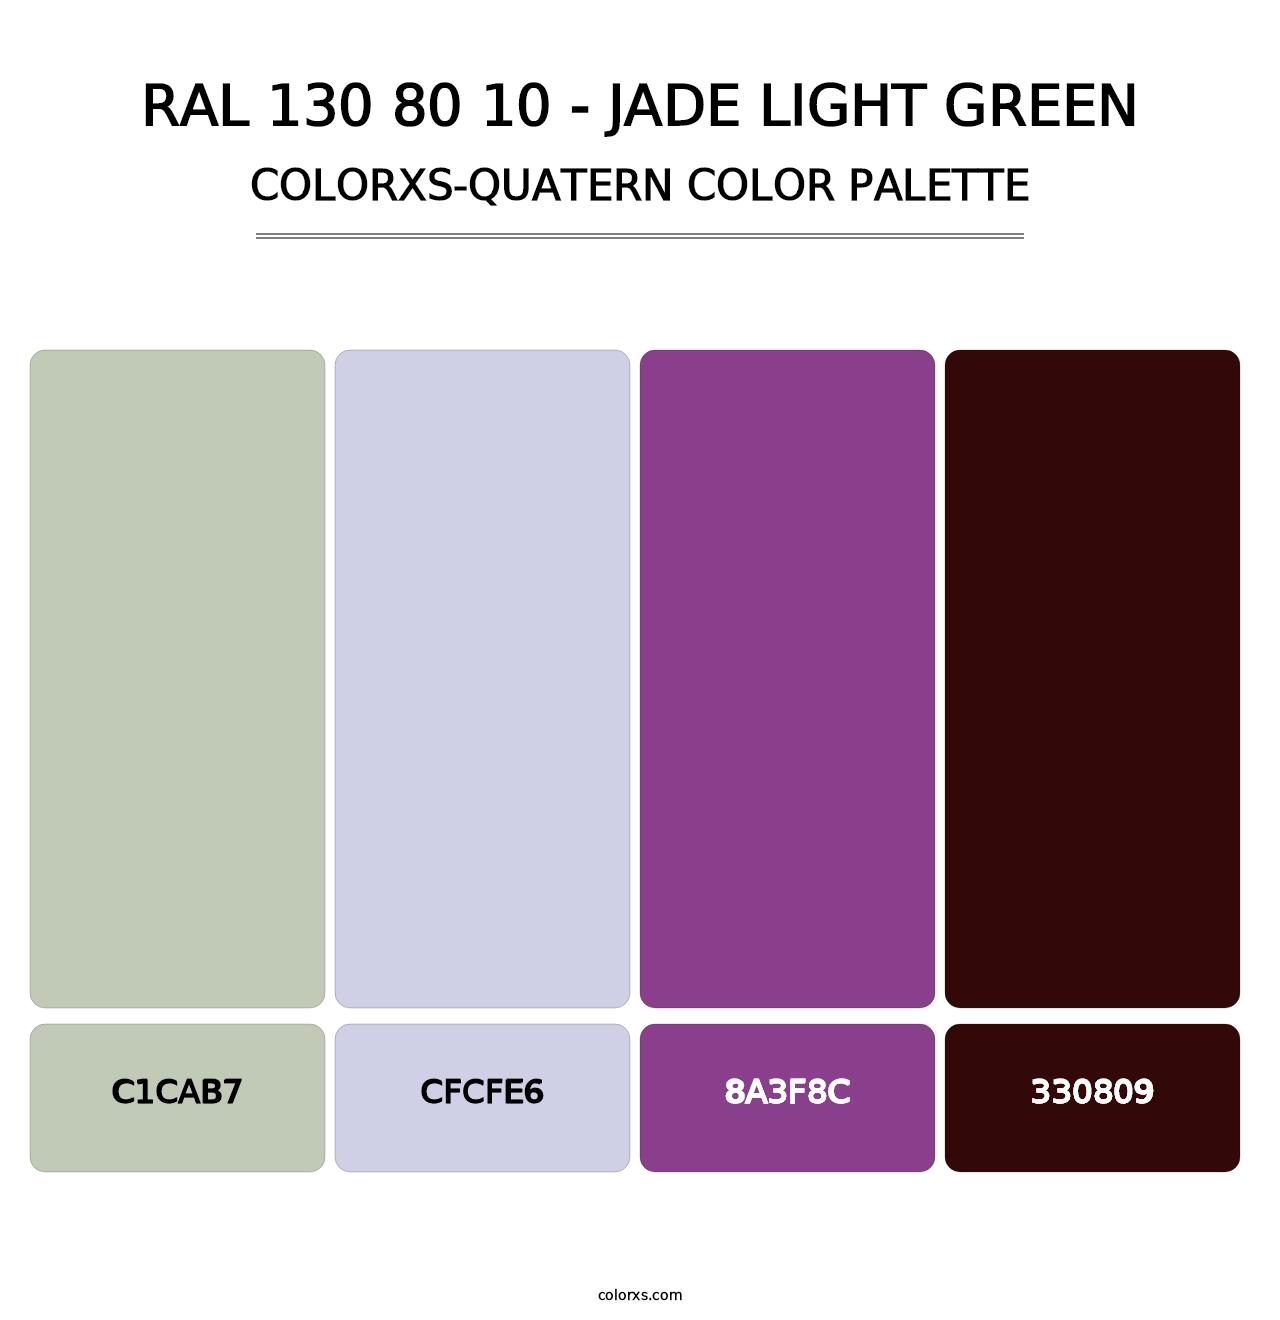 RAL 130 80 10 - Jade Light Green - Colorxs Quatern Palette